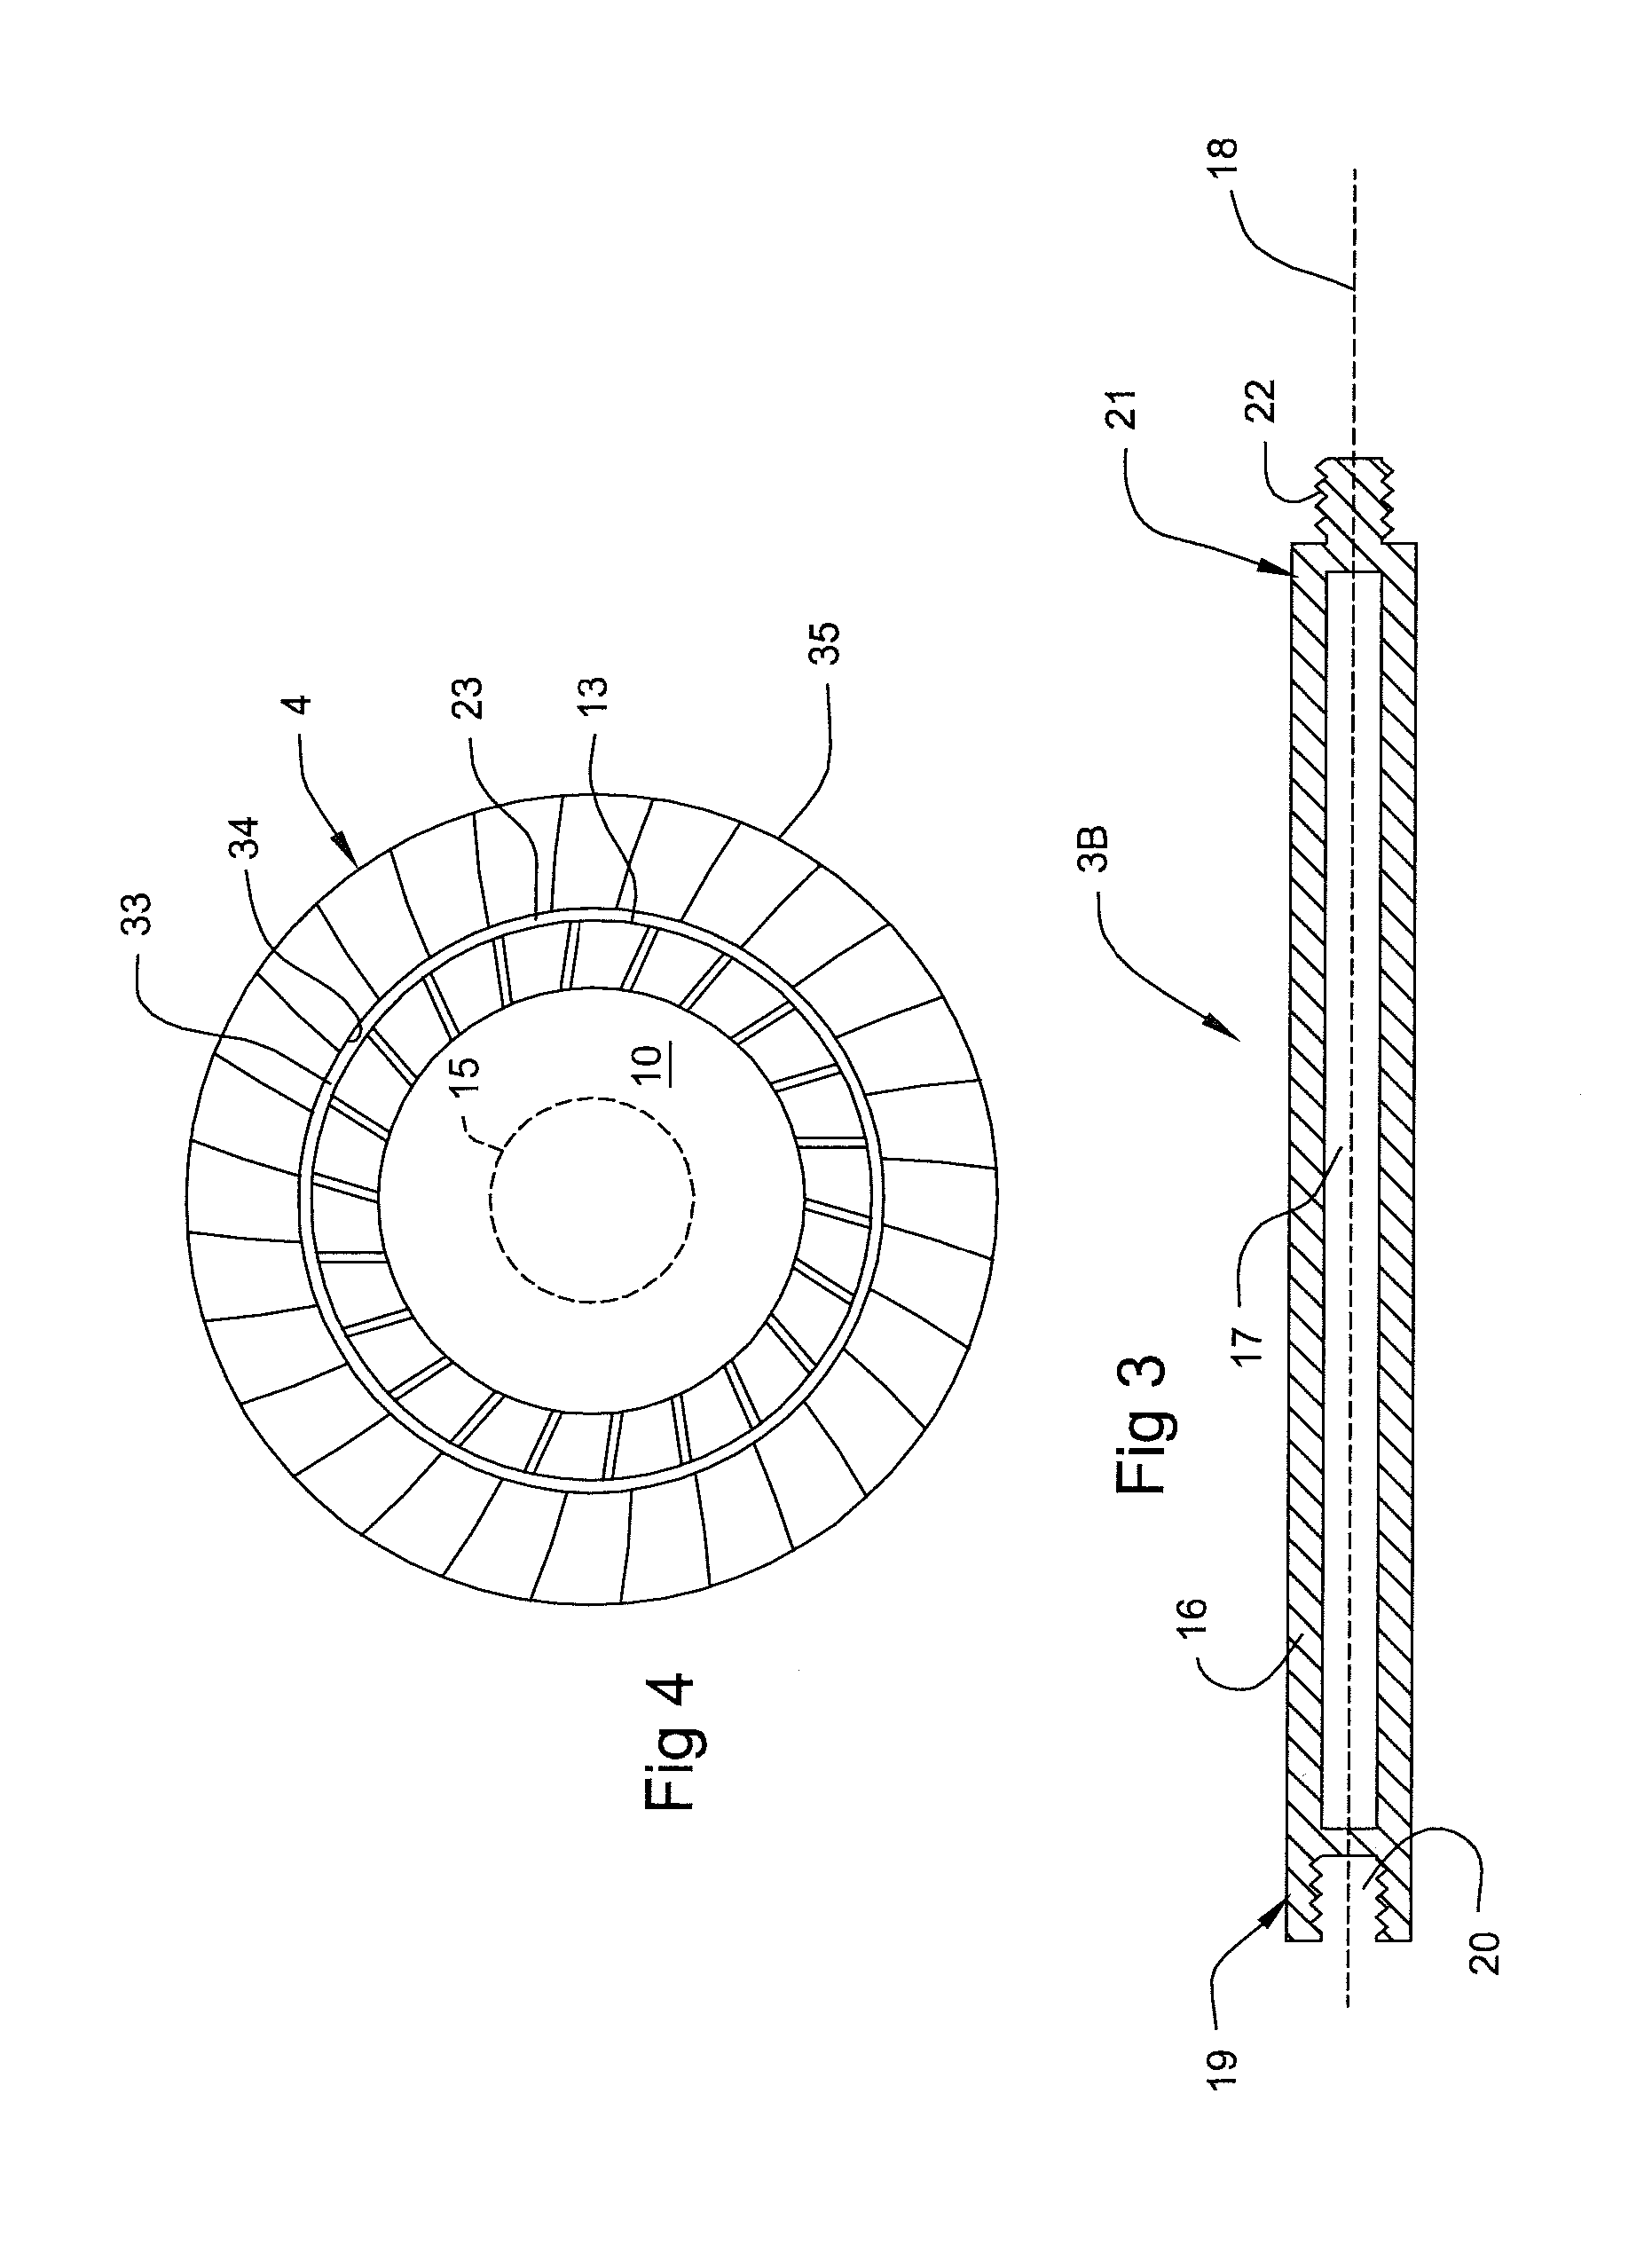 Power driven duster and cleaner apparatus